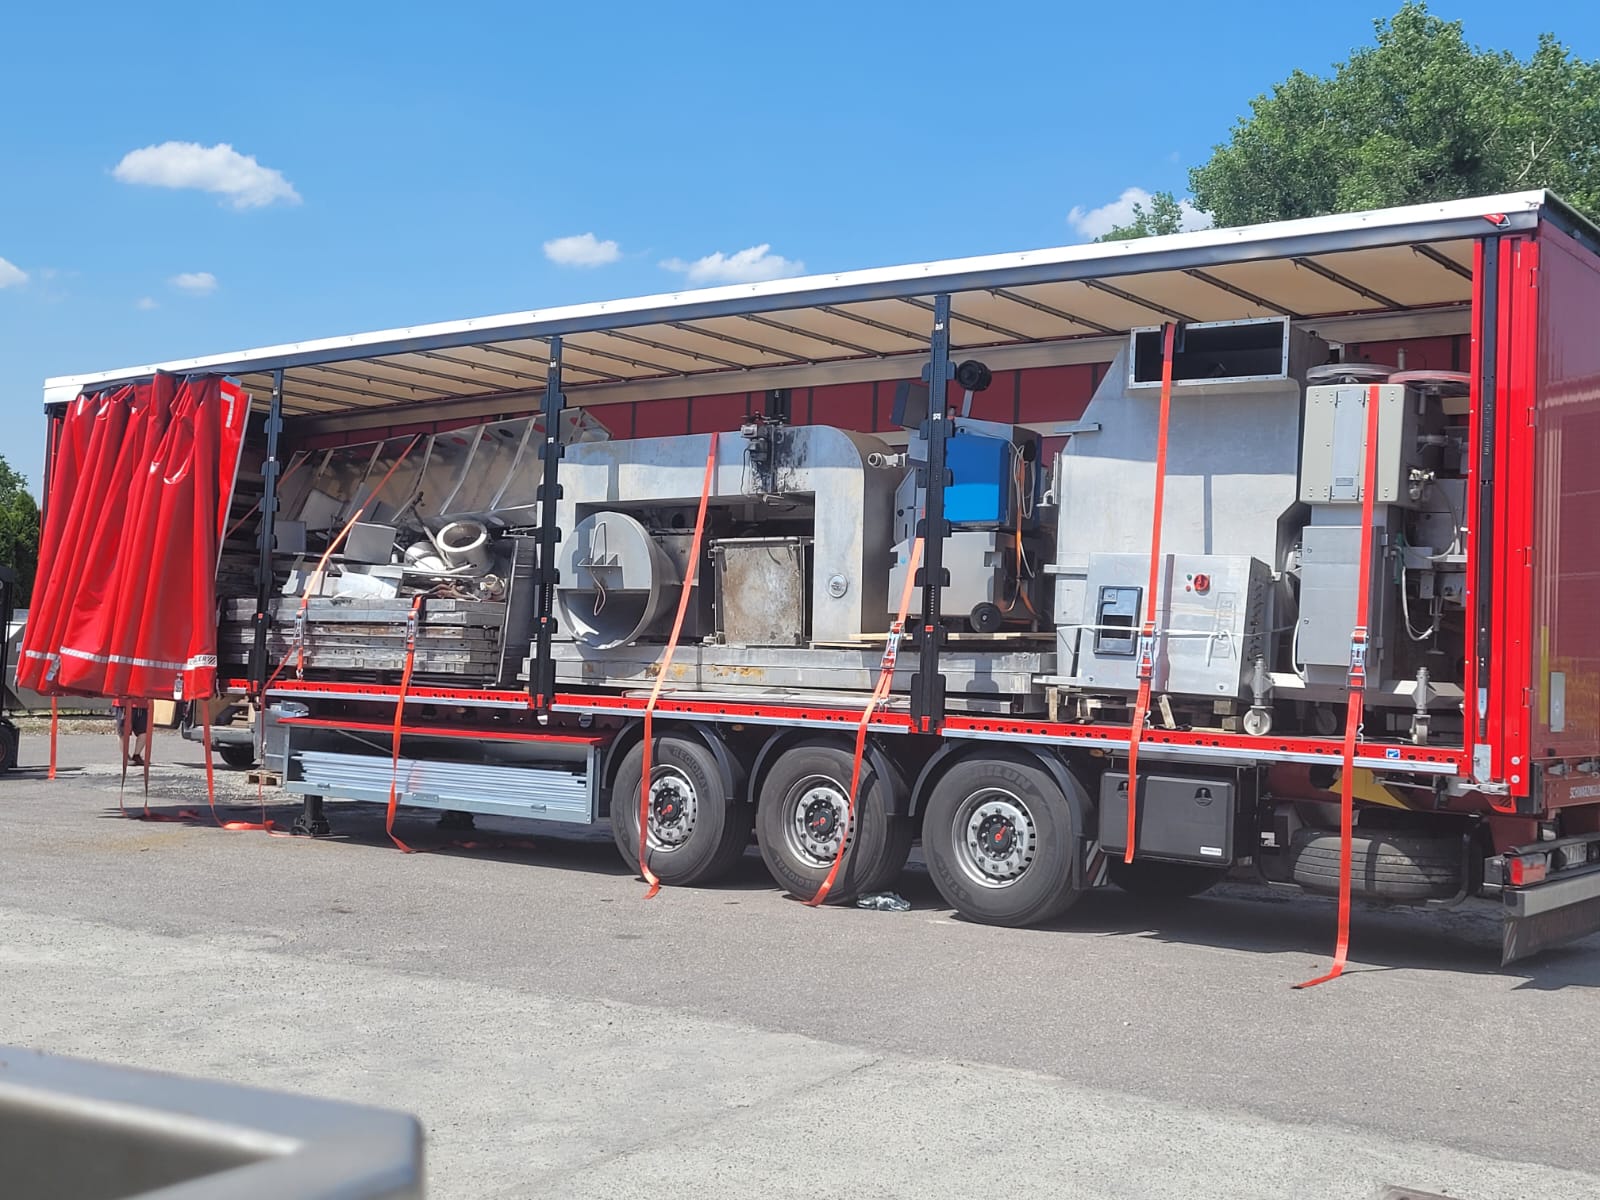 2 x Vemag for 8 trolleys smokehouses on the road to customer.